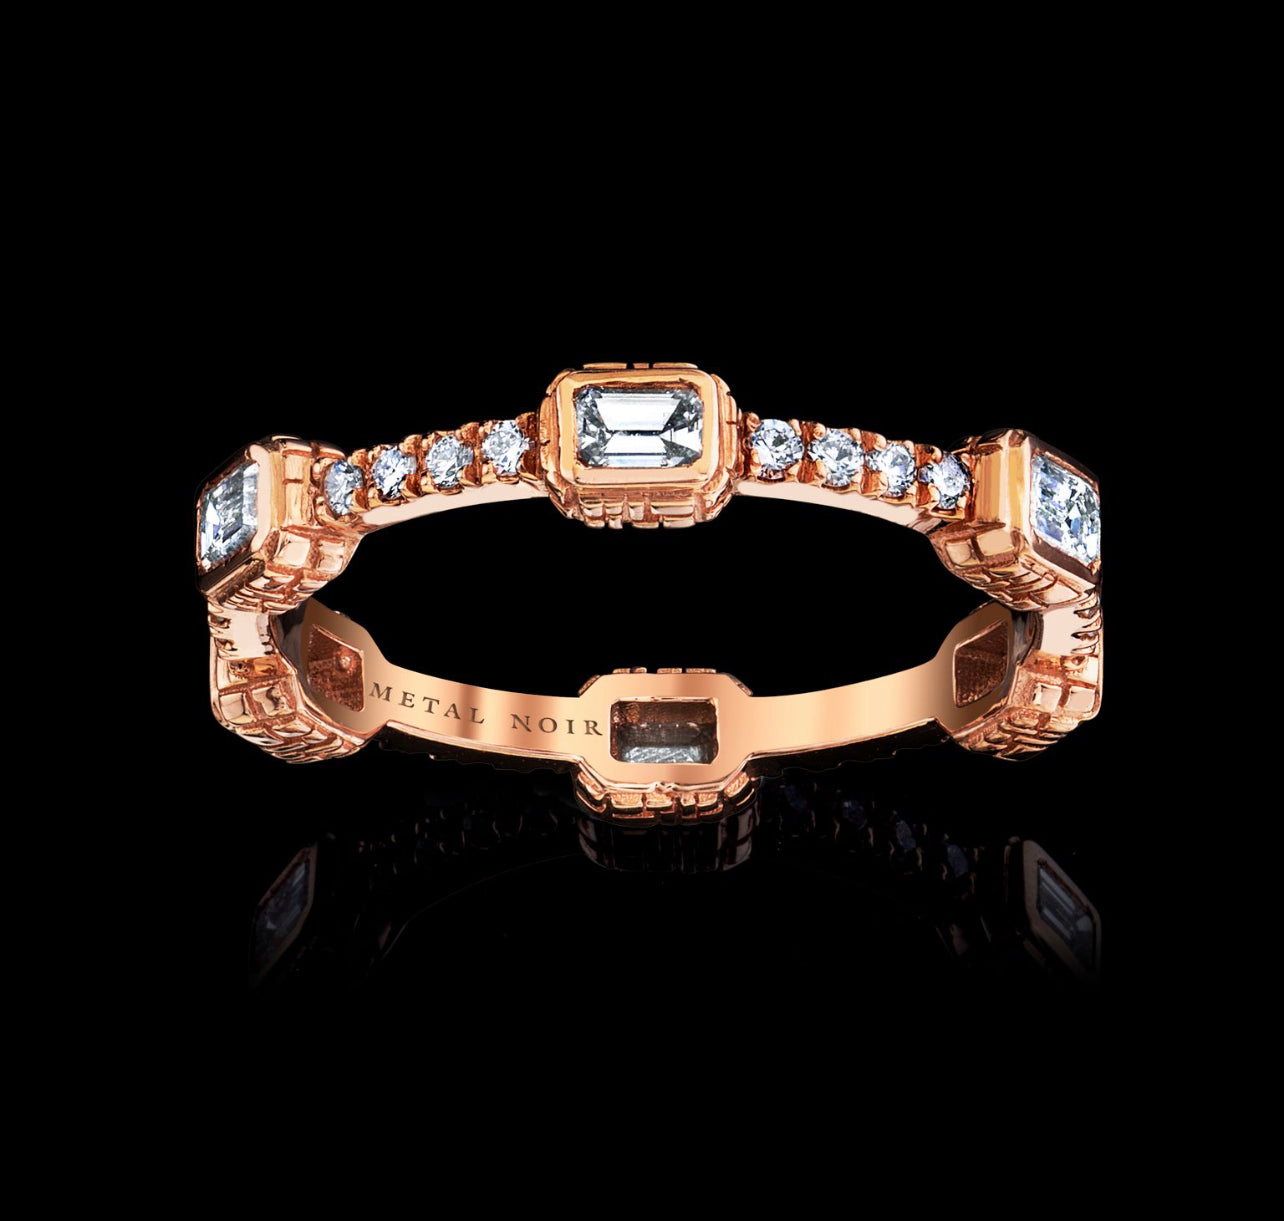 Ultra Thin Collection ‘SIX’ Eternity Diamond Ring with 10 Pointer Emerald Cut diamonds